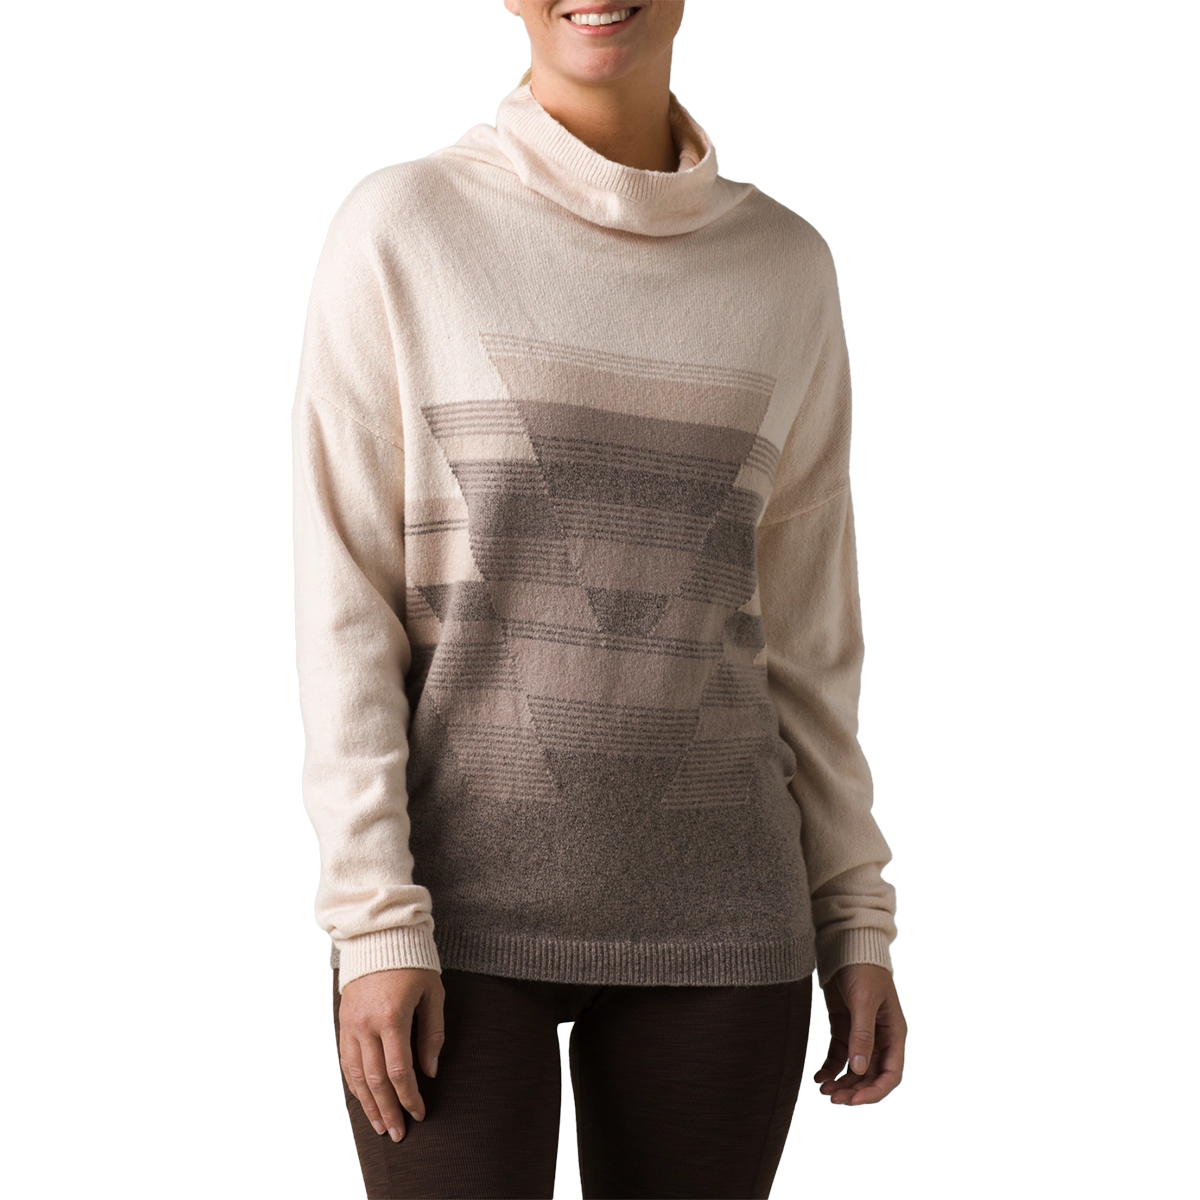 Women's Frosted Pine Sweater alternate view